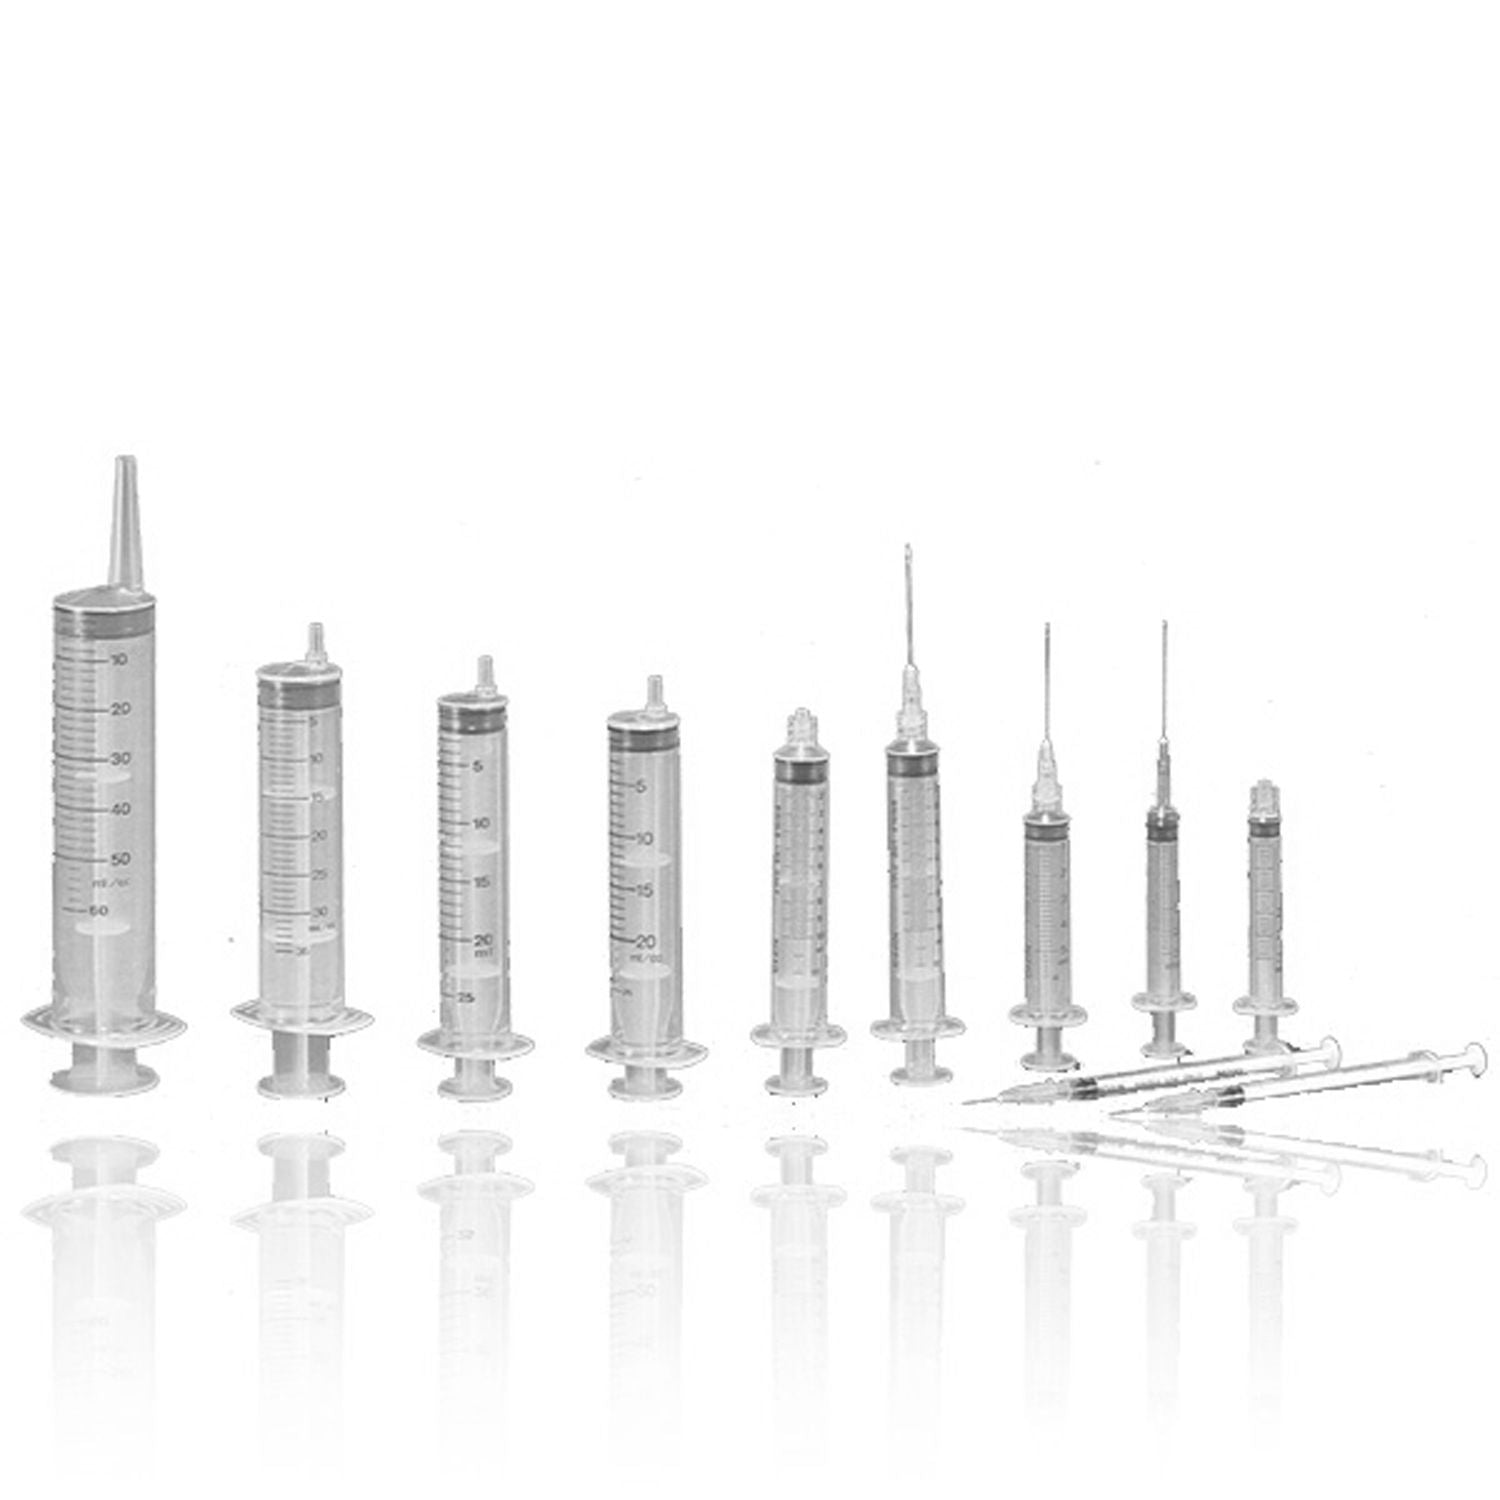 BD Integra 3mL Syringe with Retracting Needle | 21G x 25mm | Pack of 100